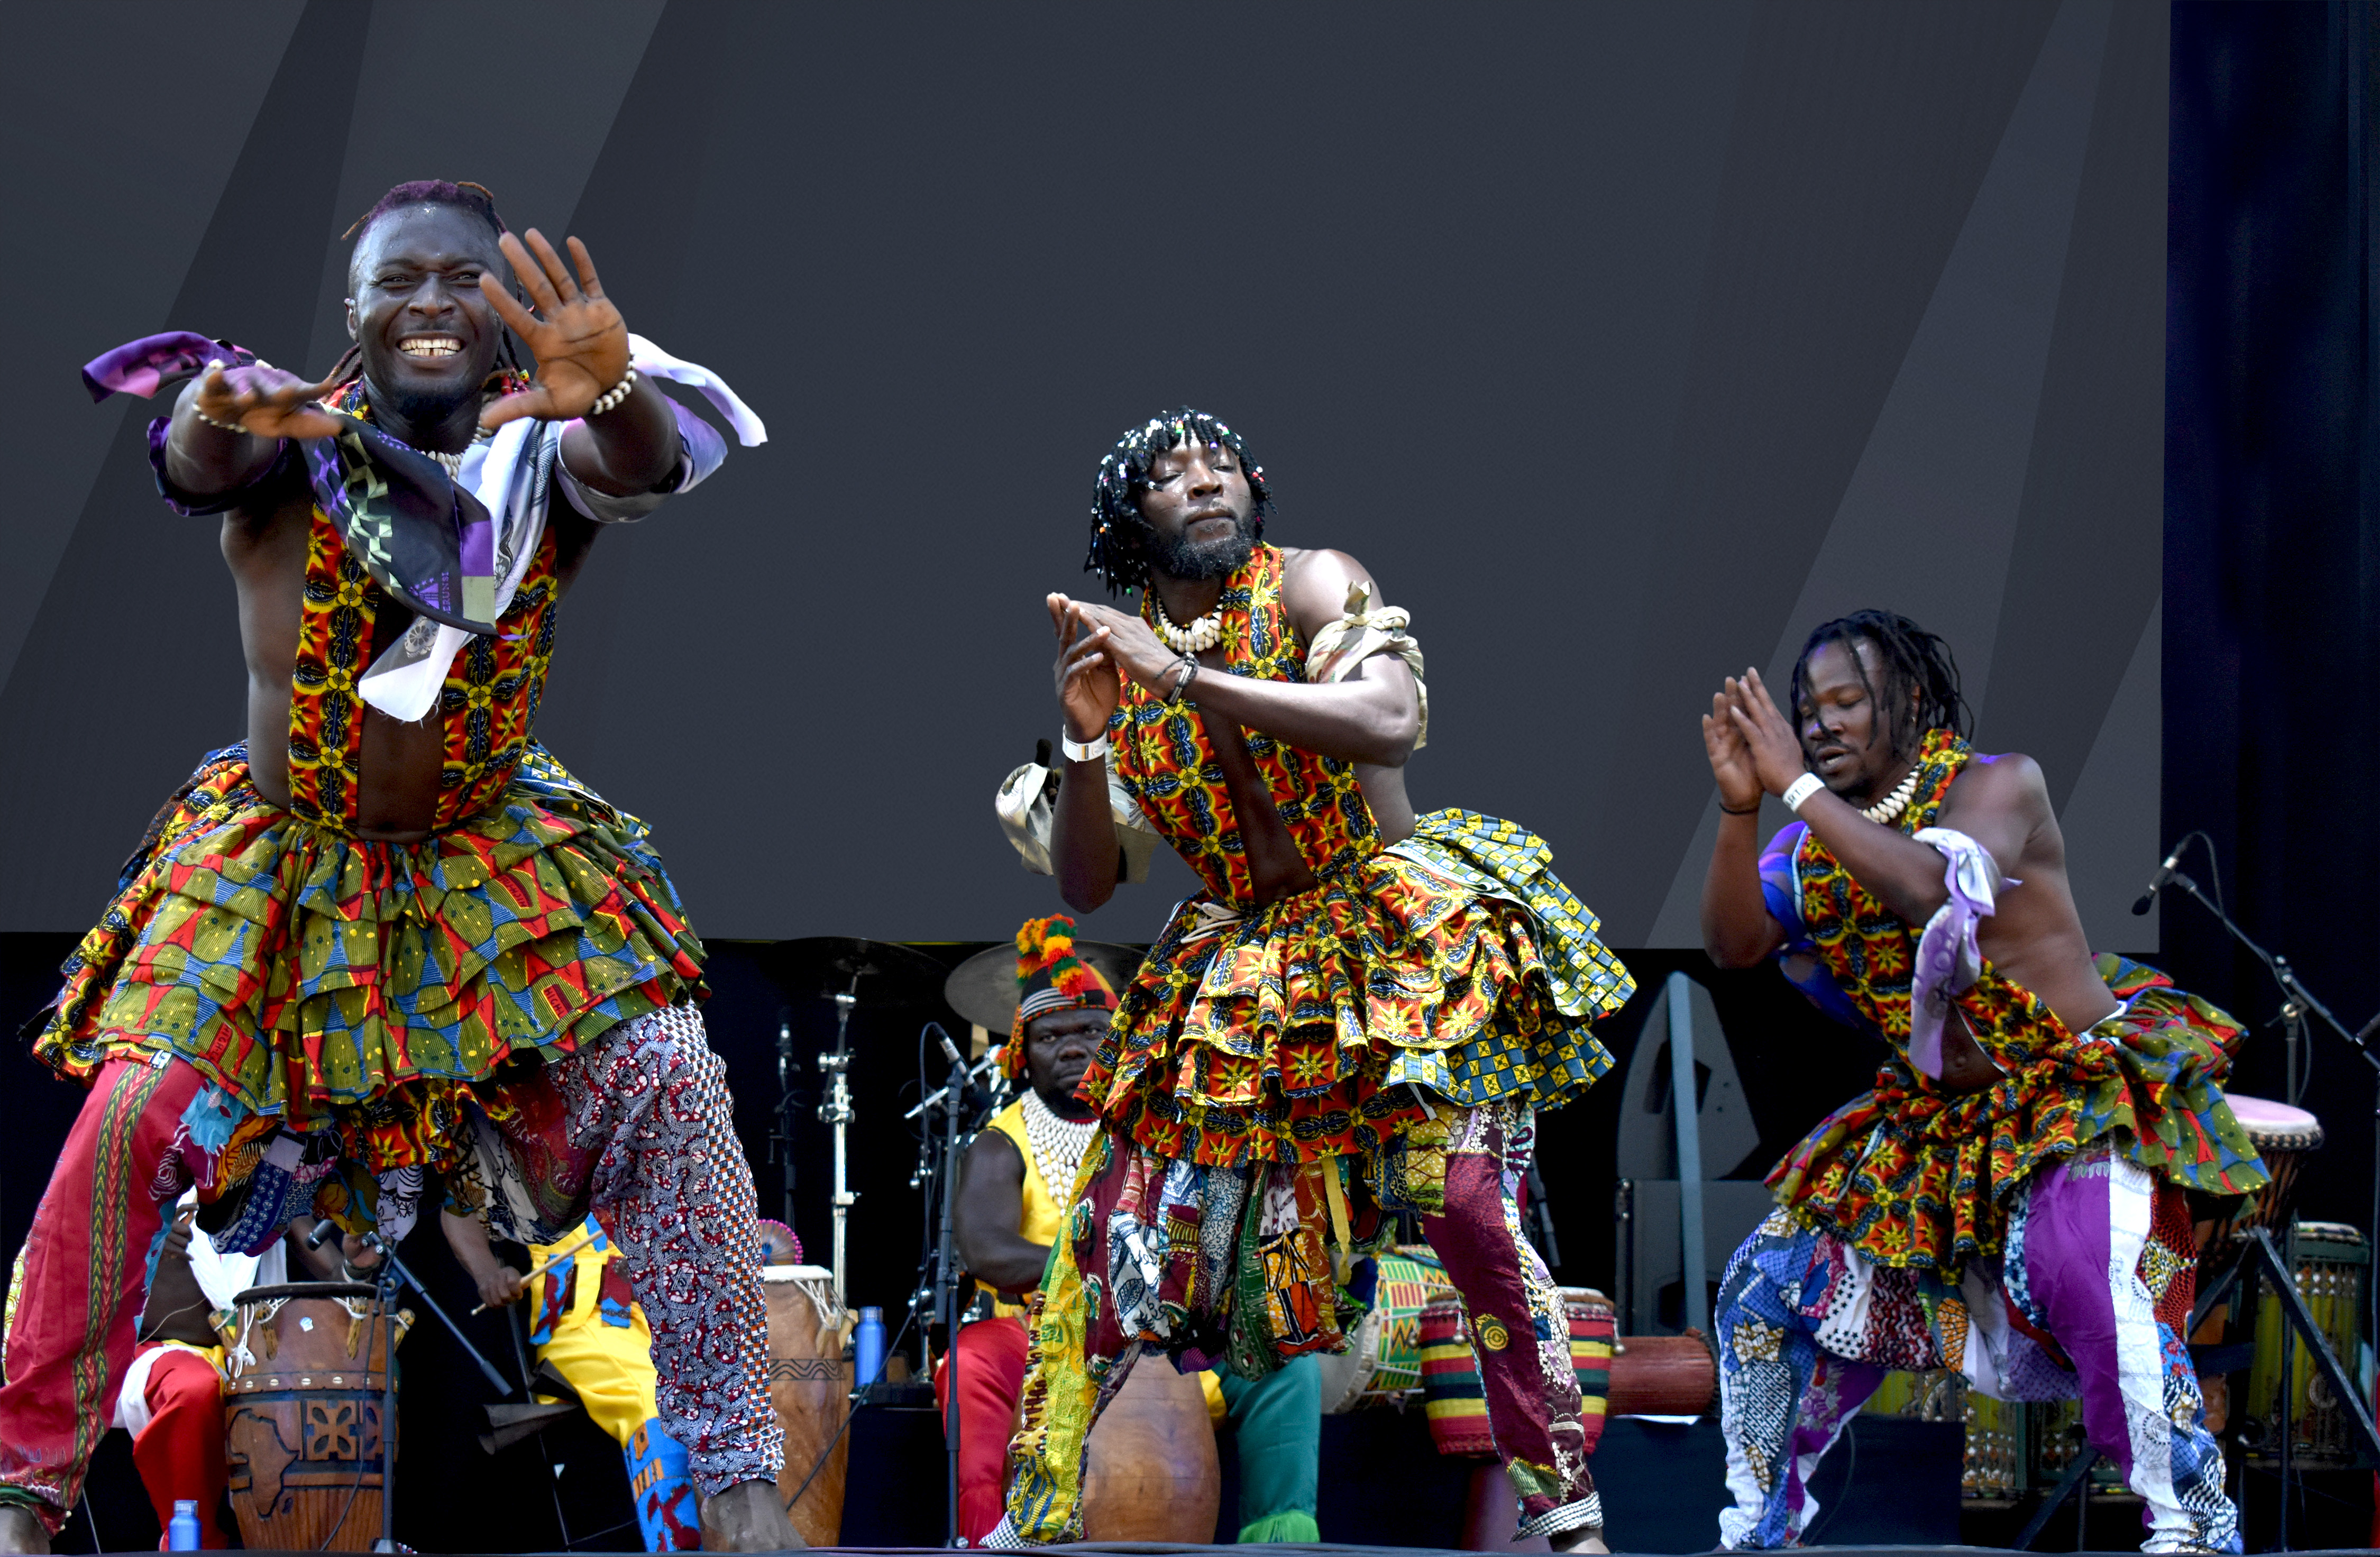 West African traditional dance performance from Asanti Dance Theatre